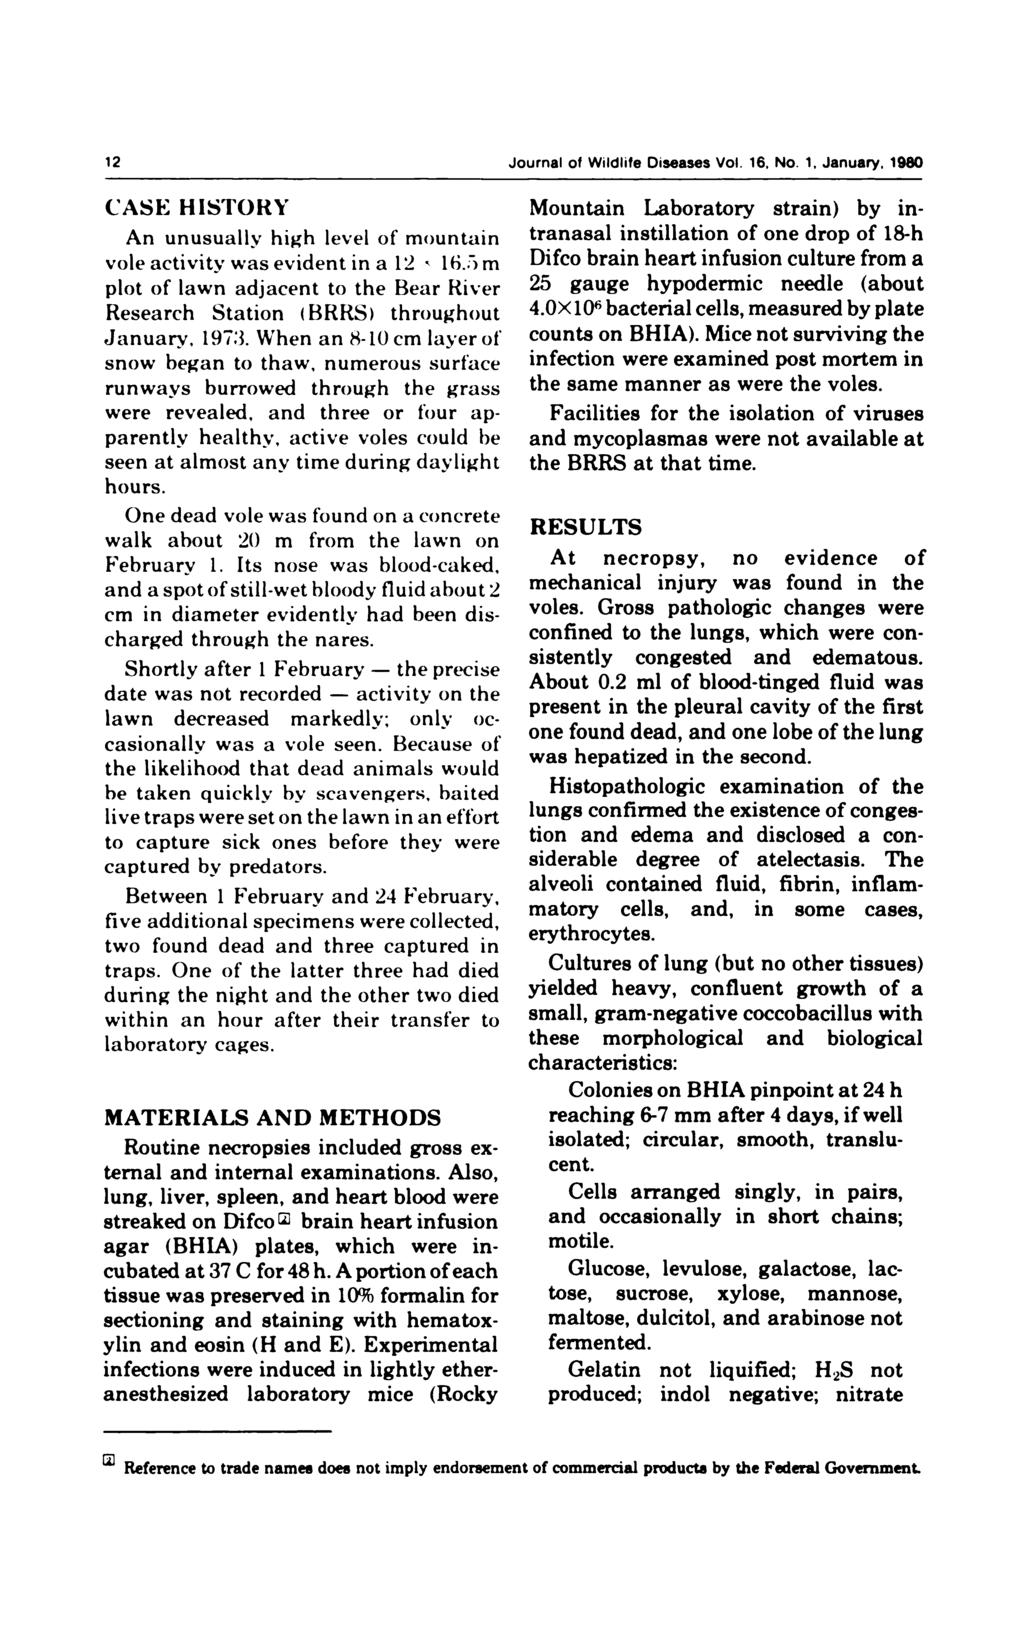 12 Journal of Wildlife Diseases Vol. 16, No. 1, January, 1980 CASE HISTORY An unusually high level of mountain vole activity was evident in a 12 16.